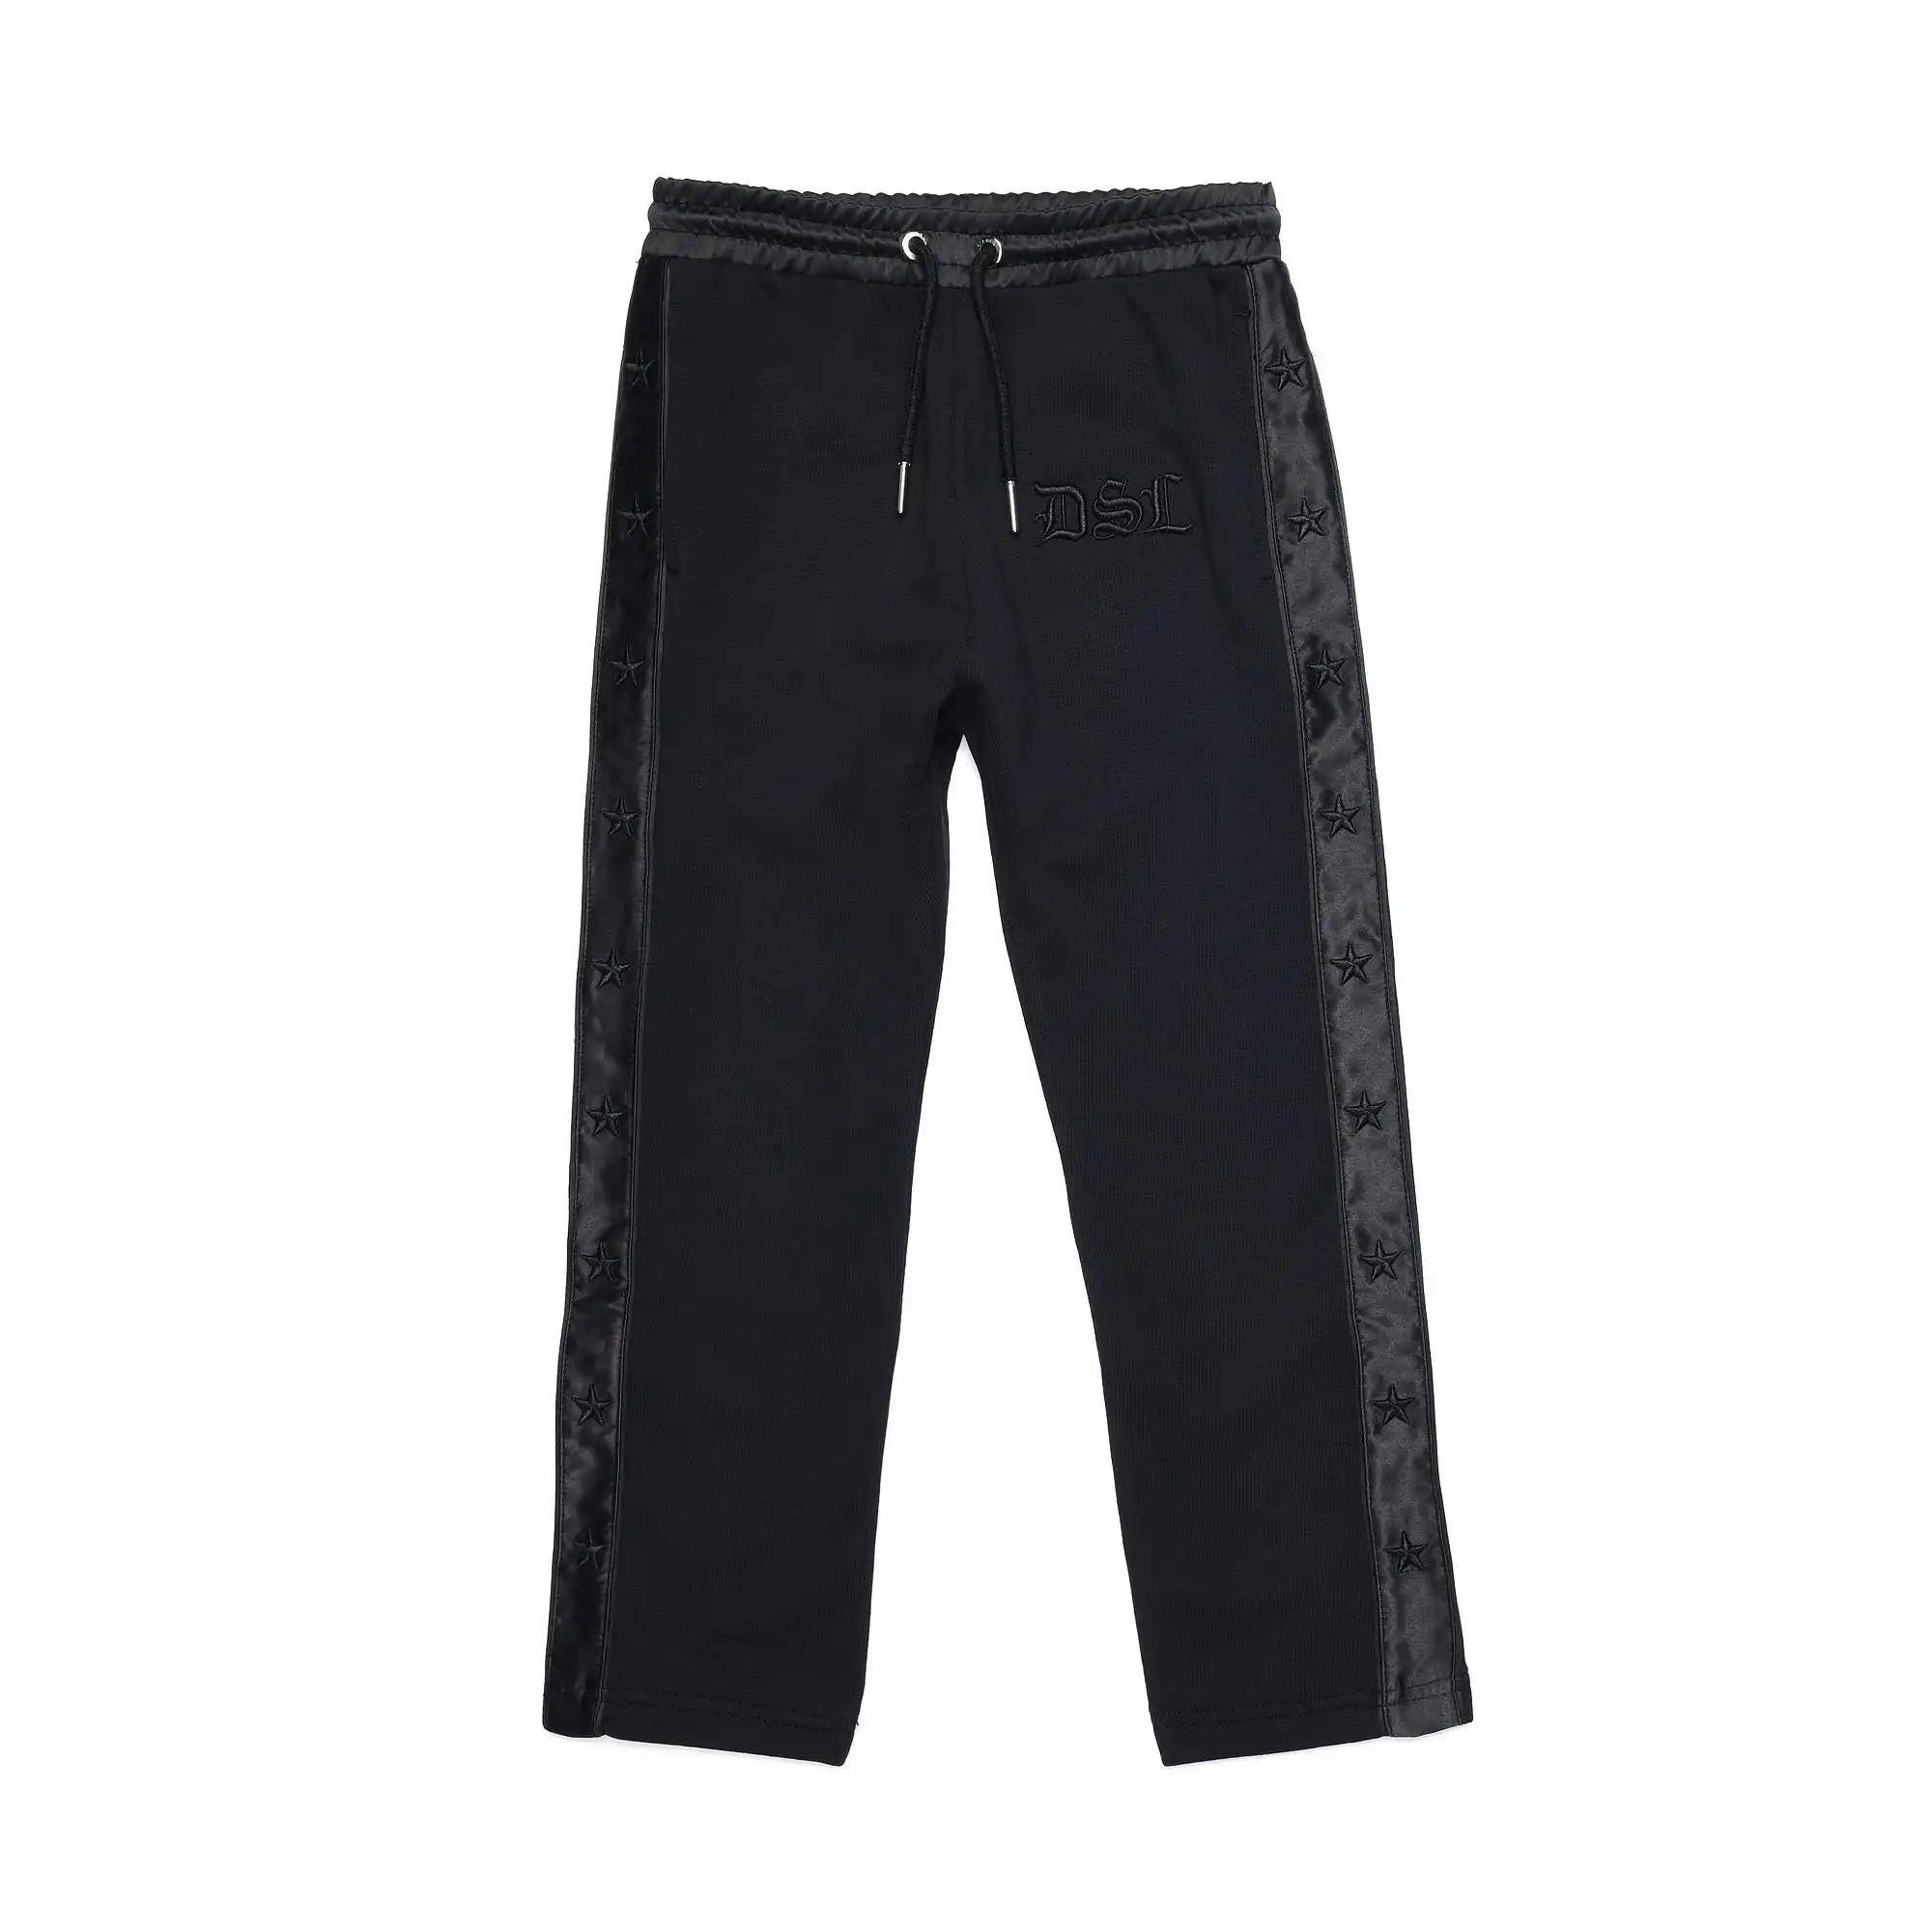 Diesel Boys Black Joggers With Elasticated Waist And Star Sides